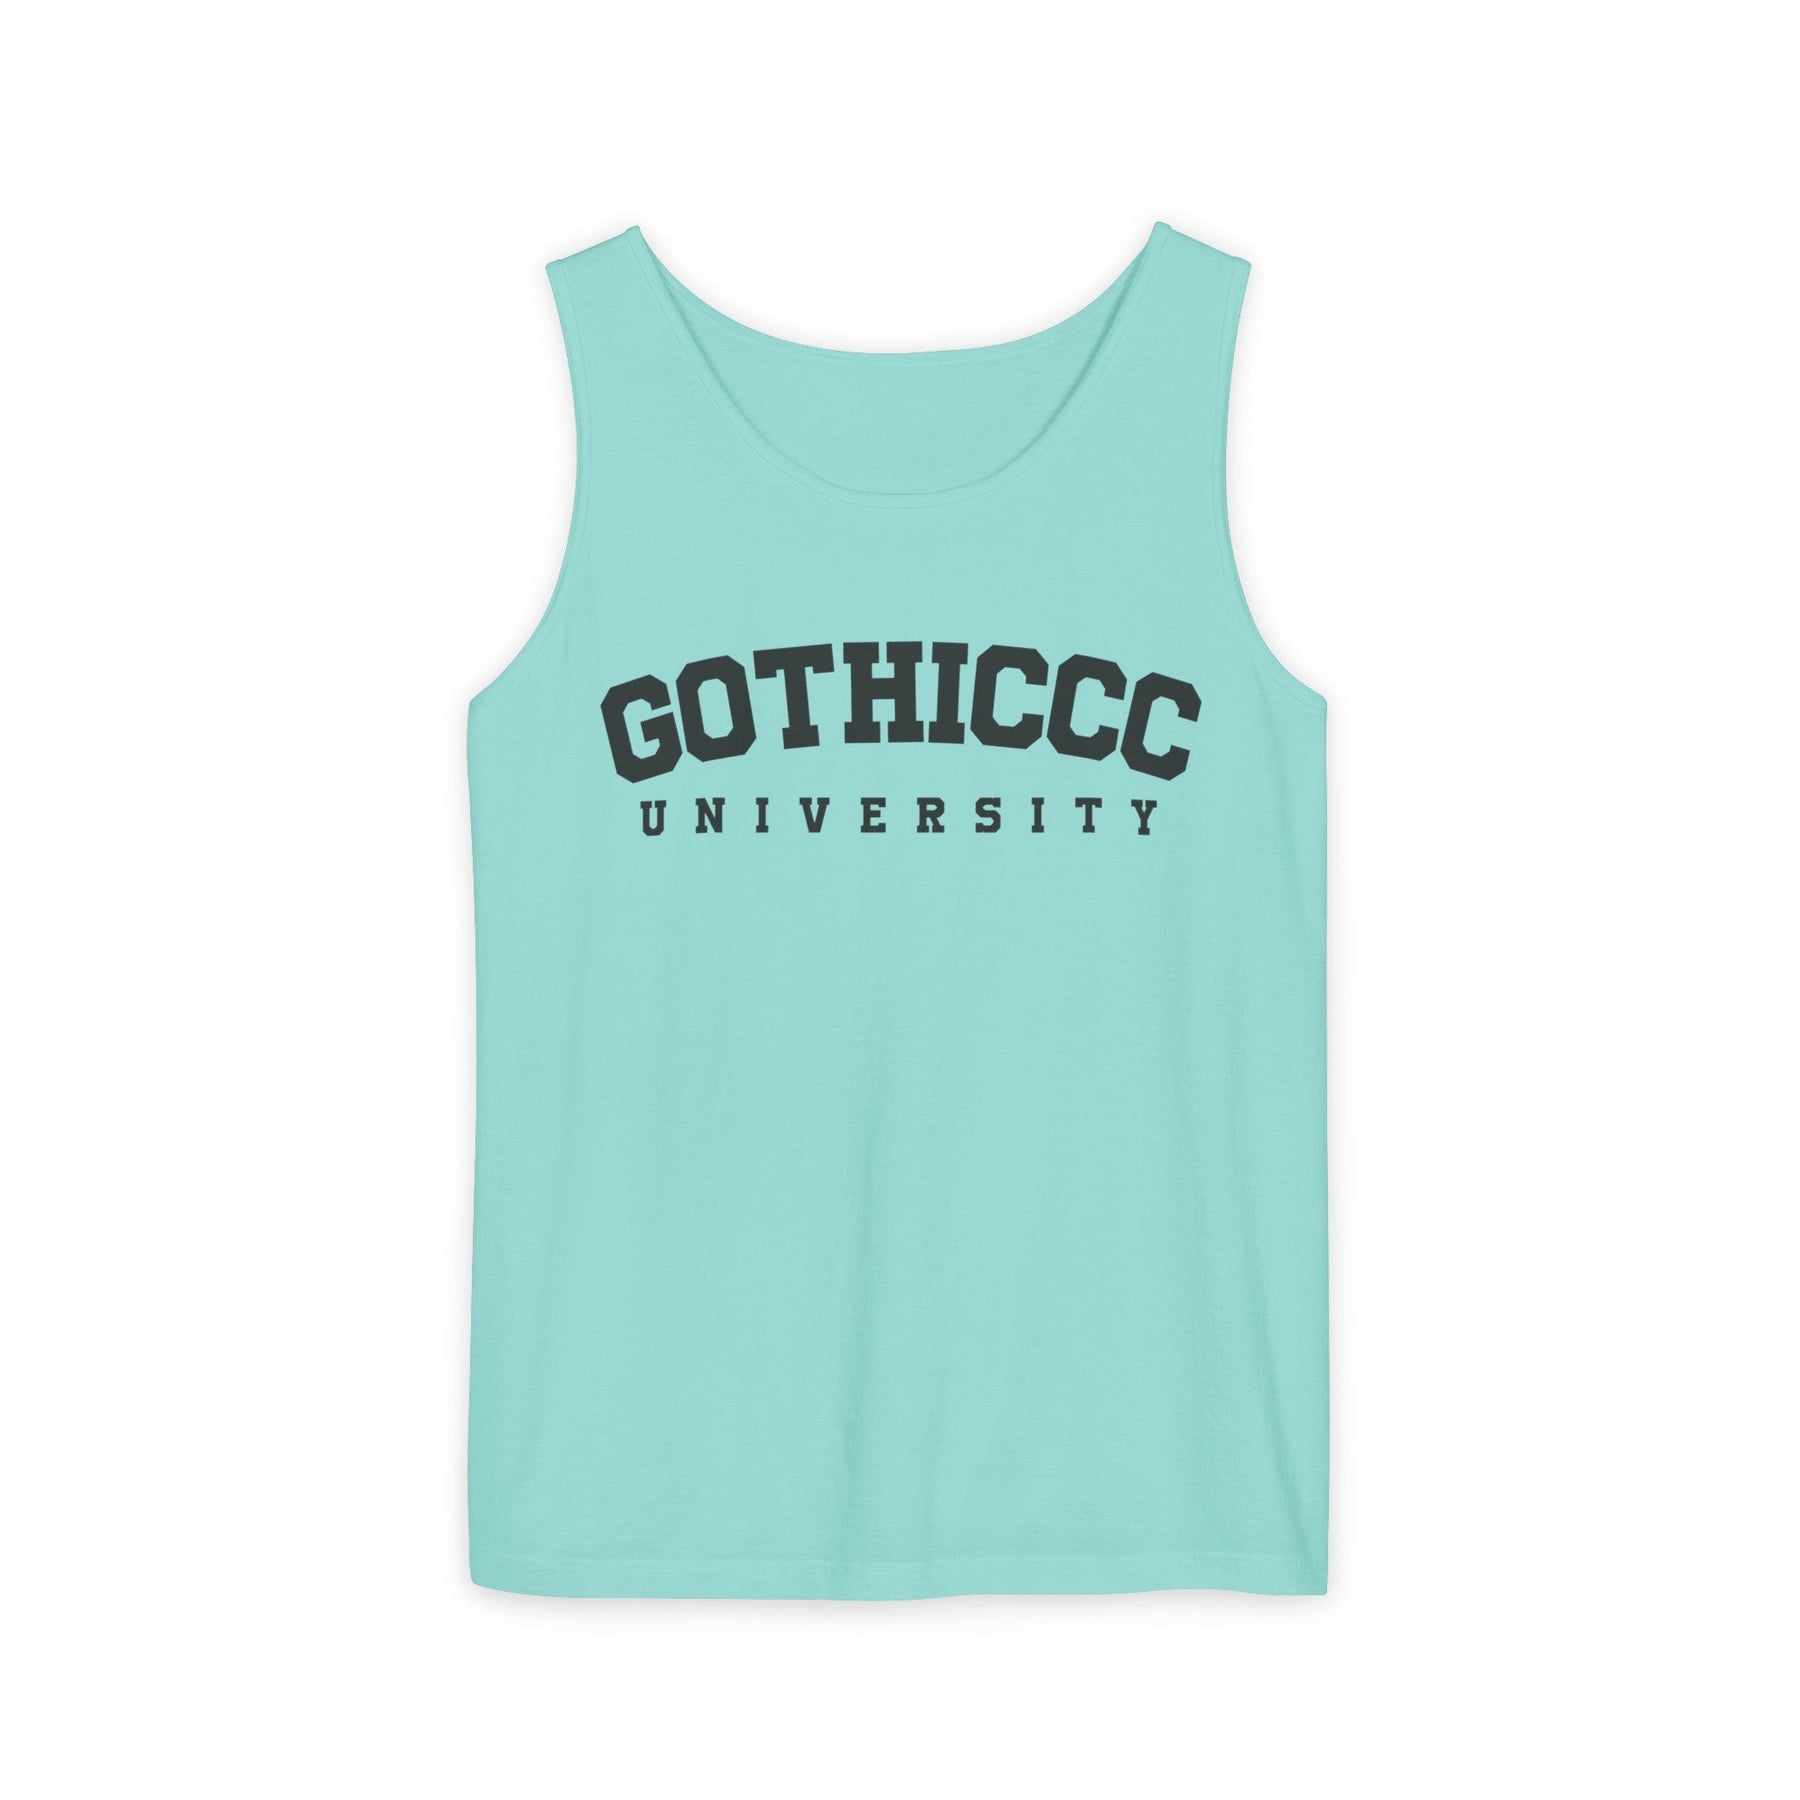 Gothiccc University Unisex Tank Top - Goth Cloth Co.Tank Top21363306282556257255